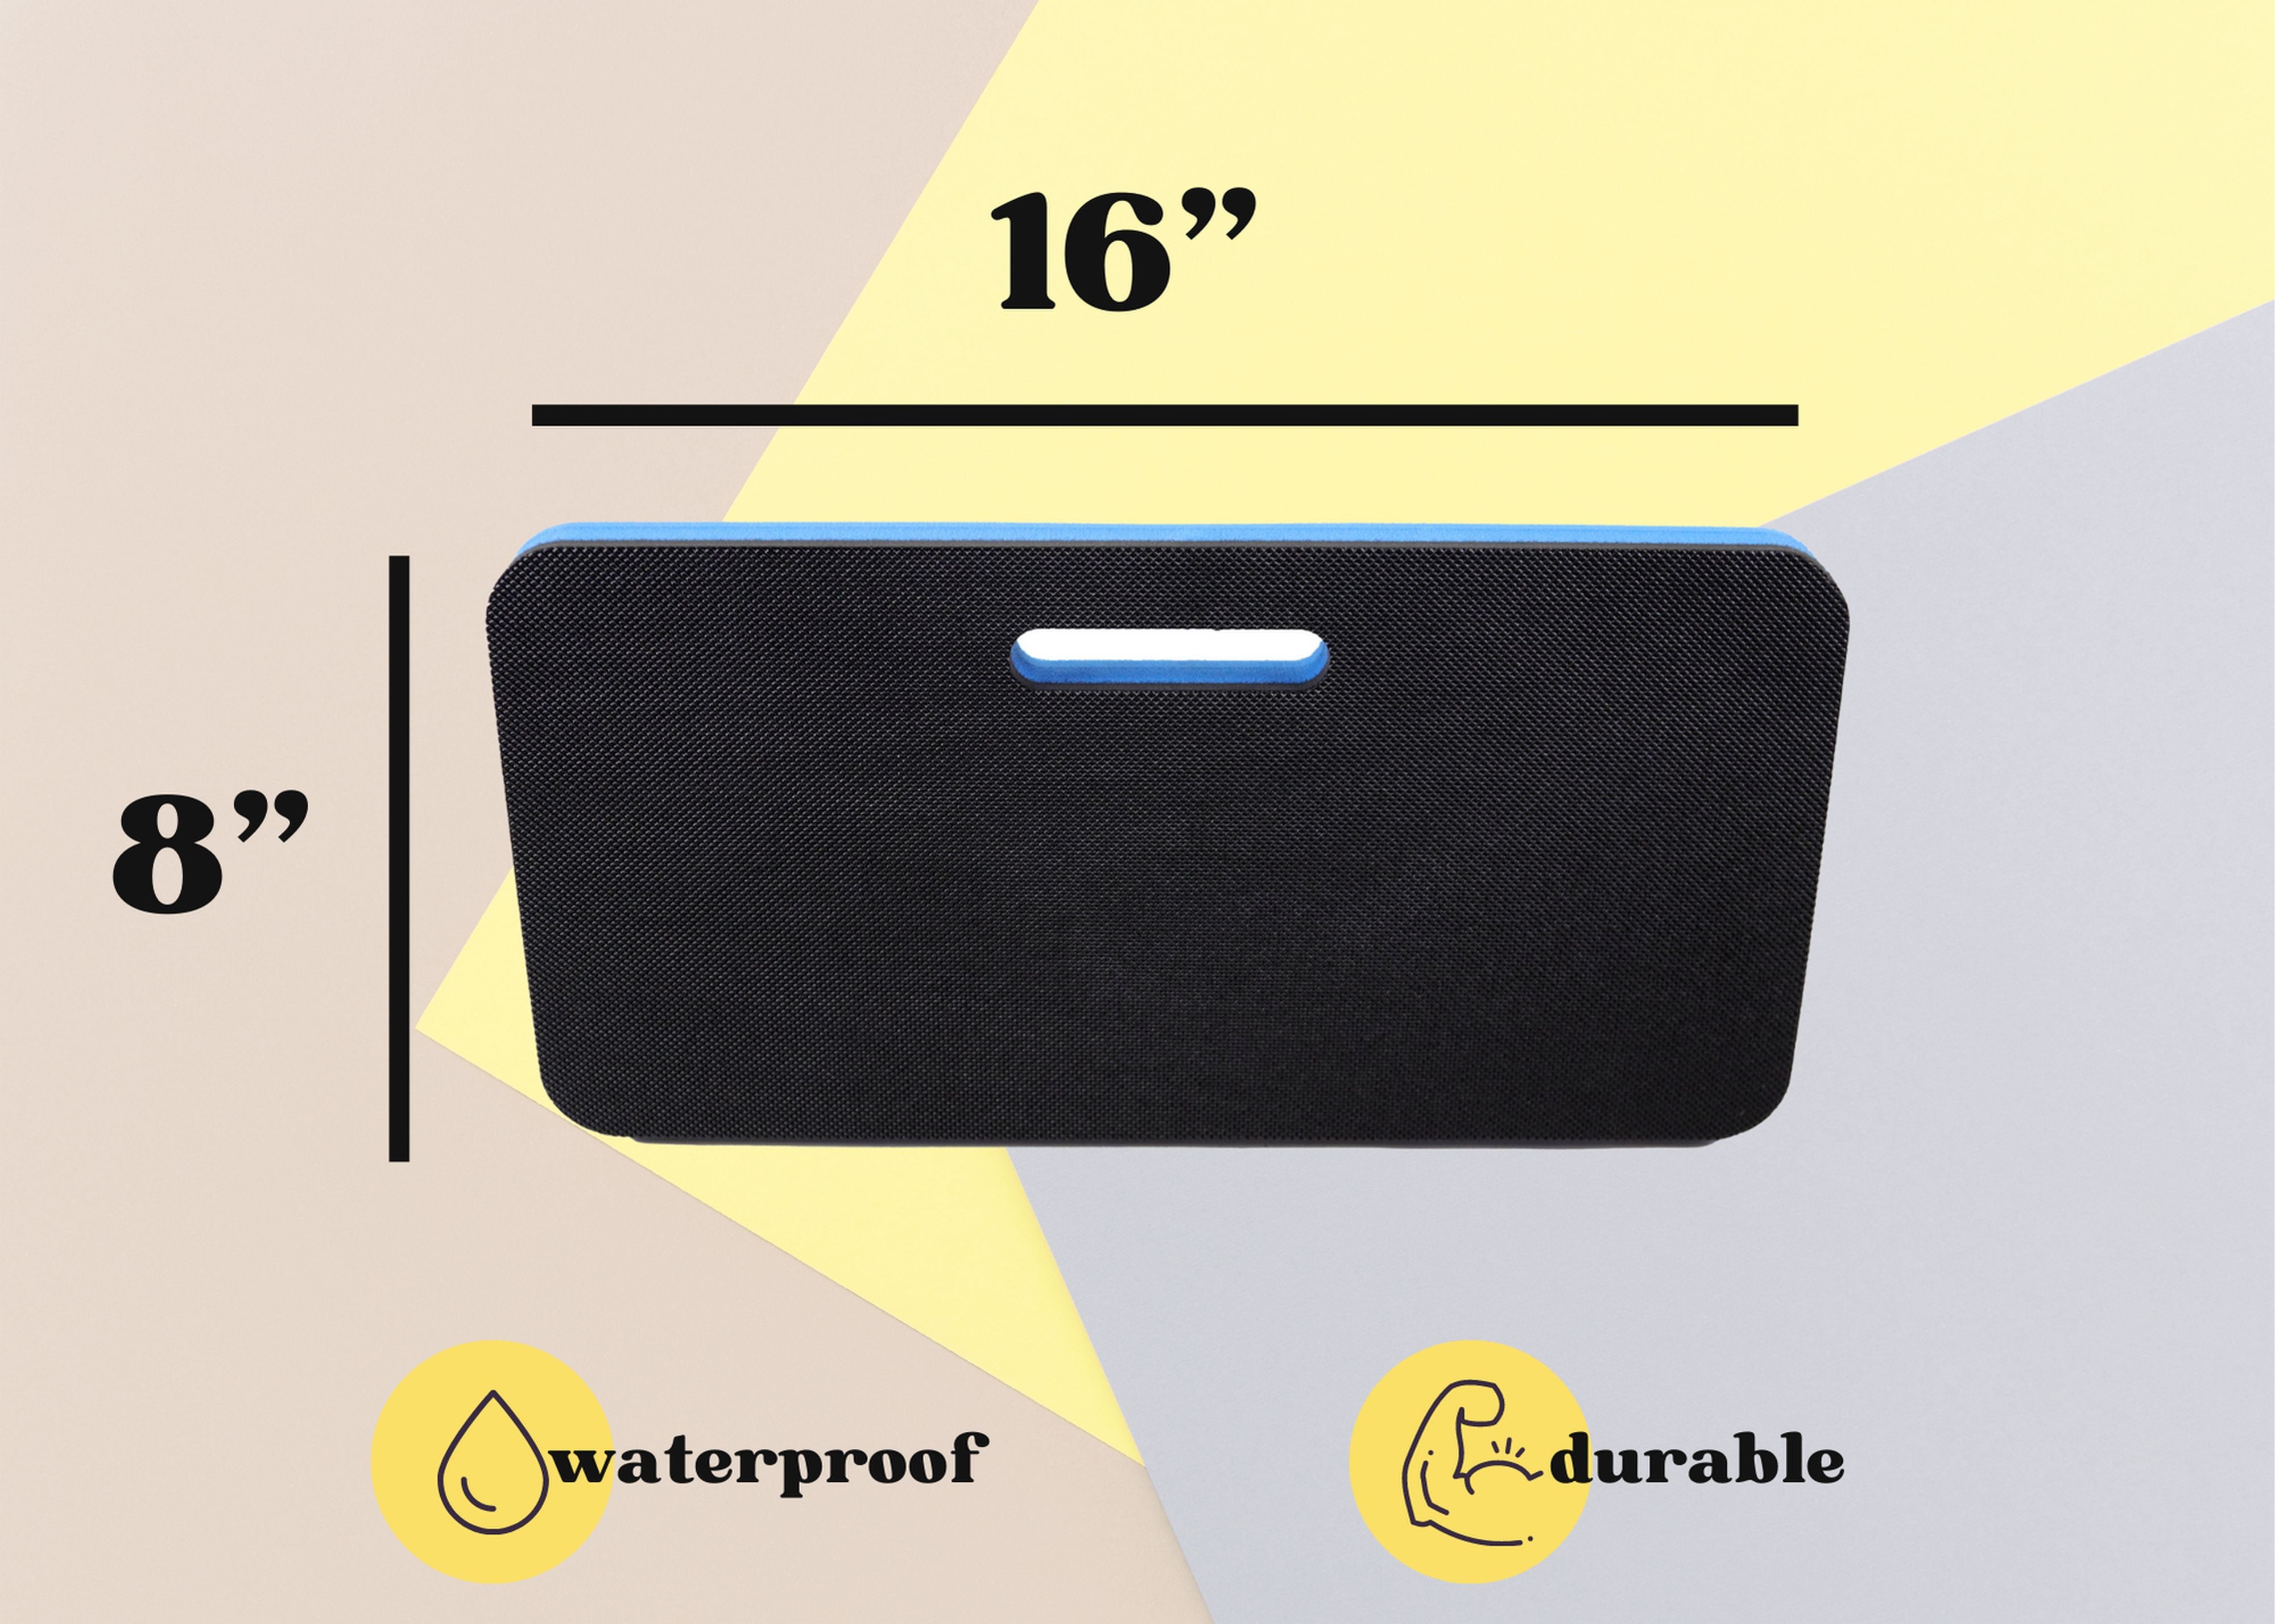 3 Portable Knee Cushions Blue and Black for Home Garden Work Automotive Workshop and More Durable Thick Comfortable High Density Waterproof Foam 16 x 8 Inches Kneeling Pad